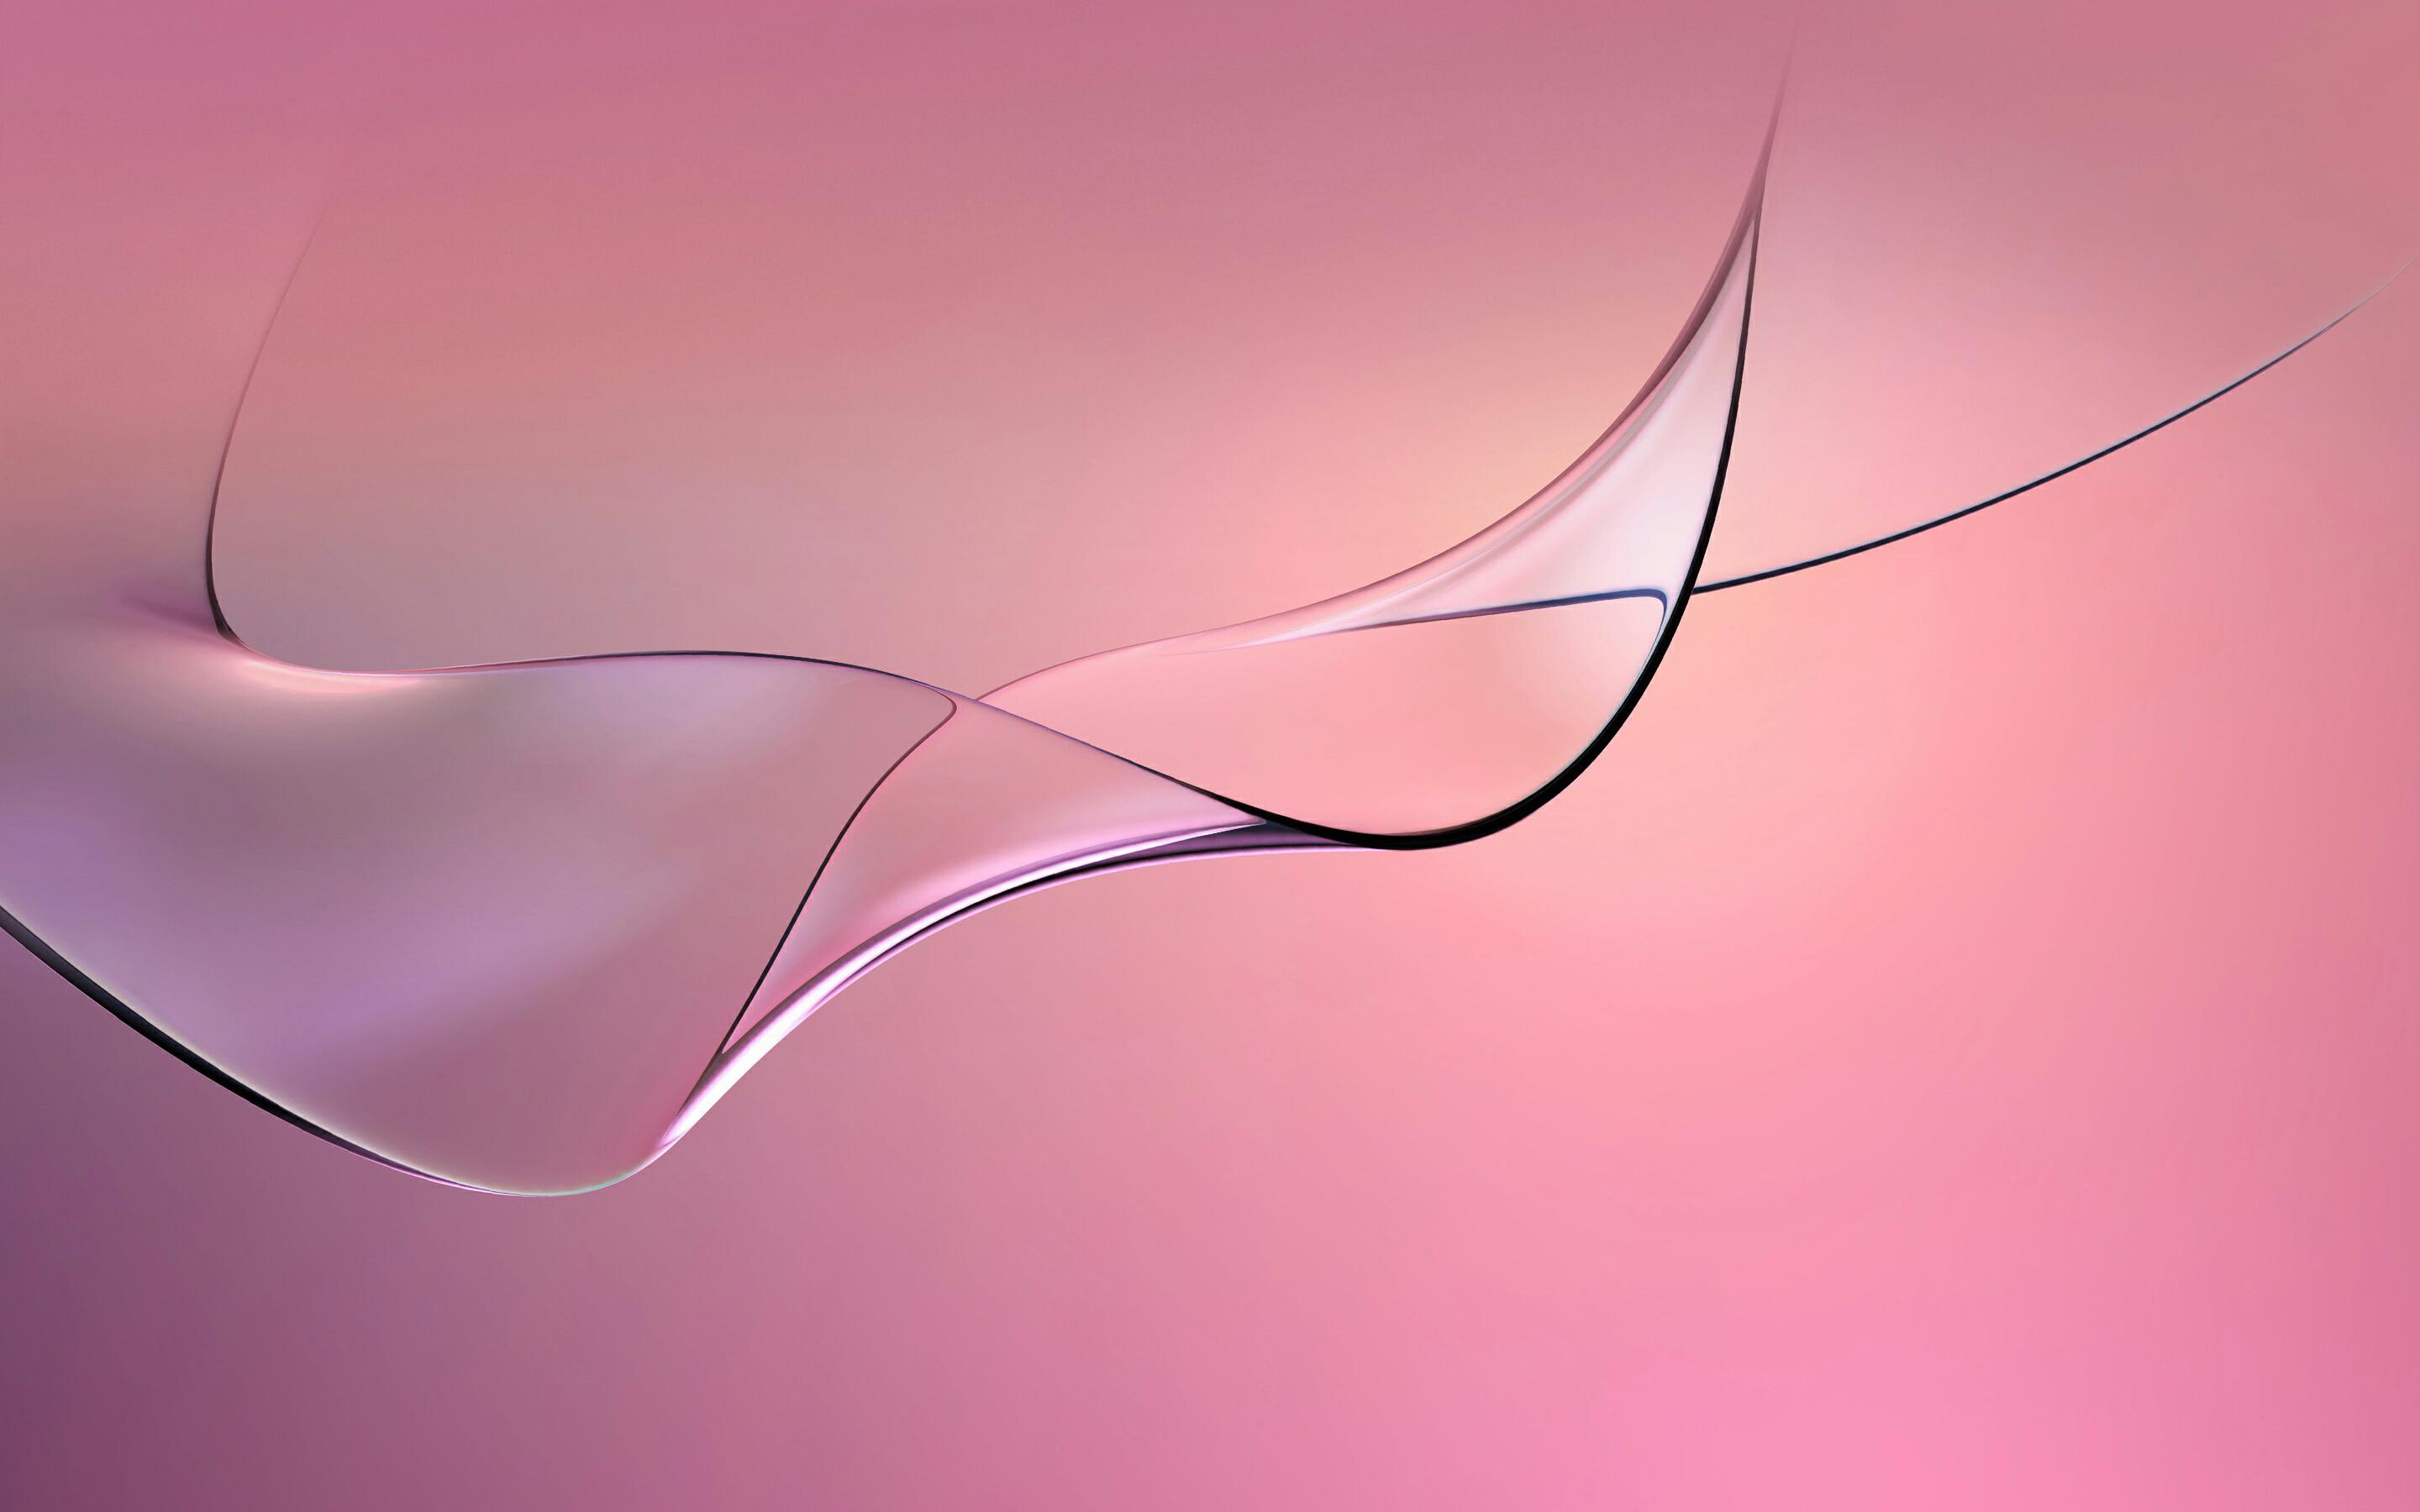 Wallpaper 4k Pink Curves Abstract abstract, Curves, Pink, Splash